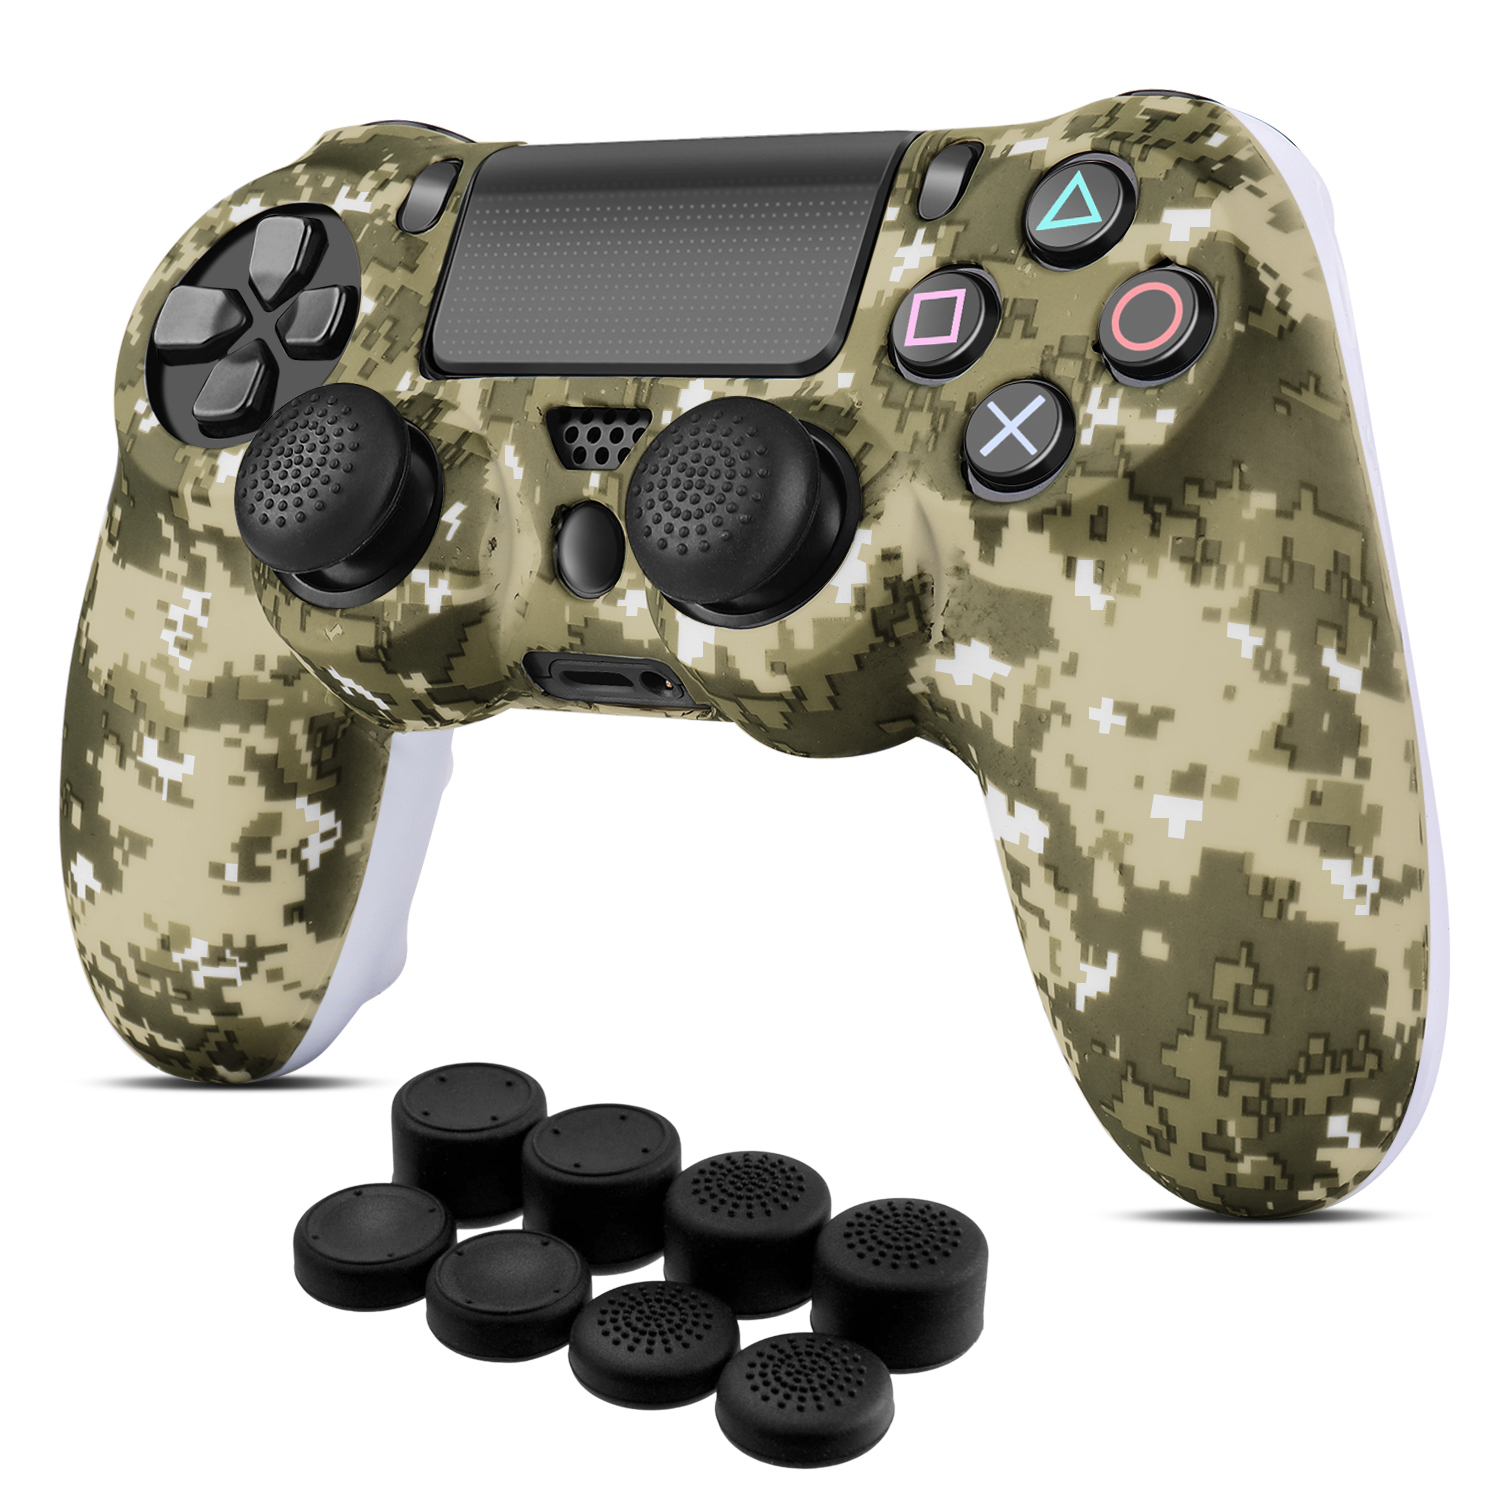 silicone skin for ps4 controller